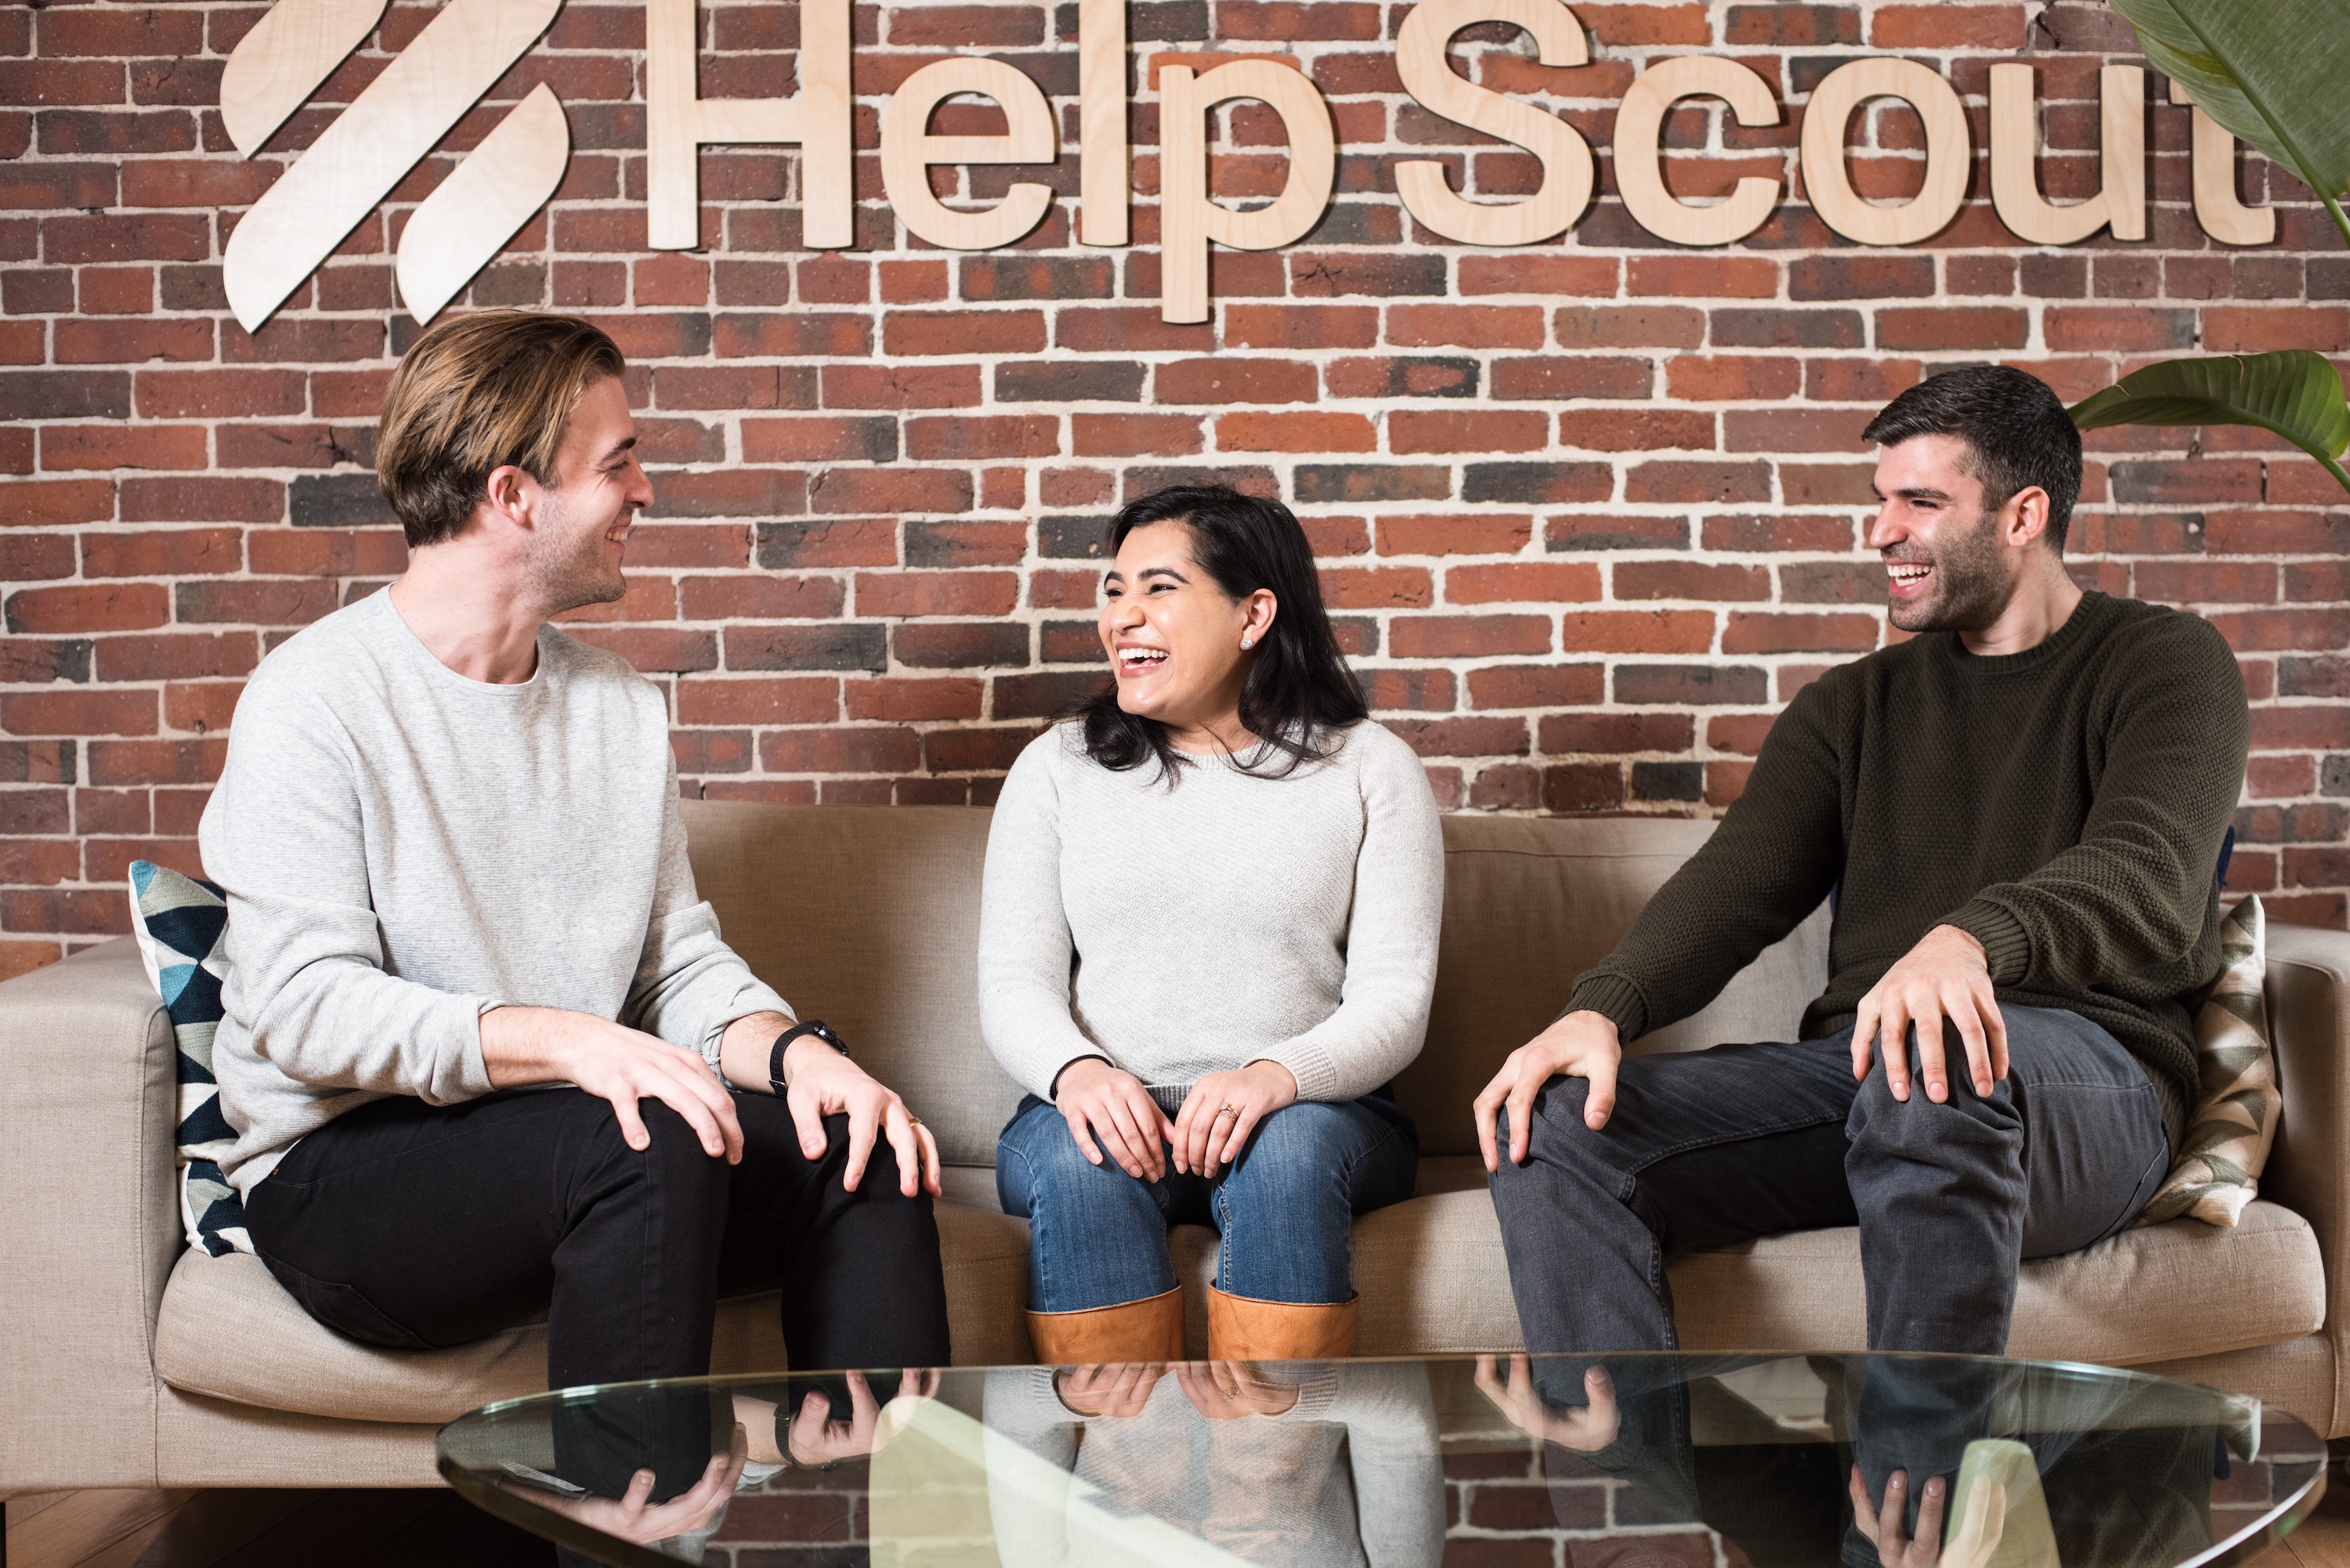 How Help Scout Balances Sales, Marketing & Support To Grow Their Business